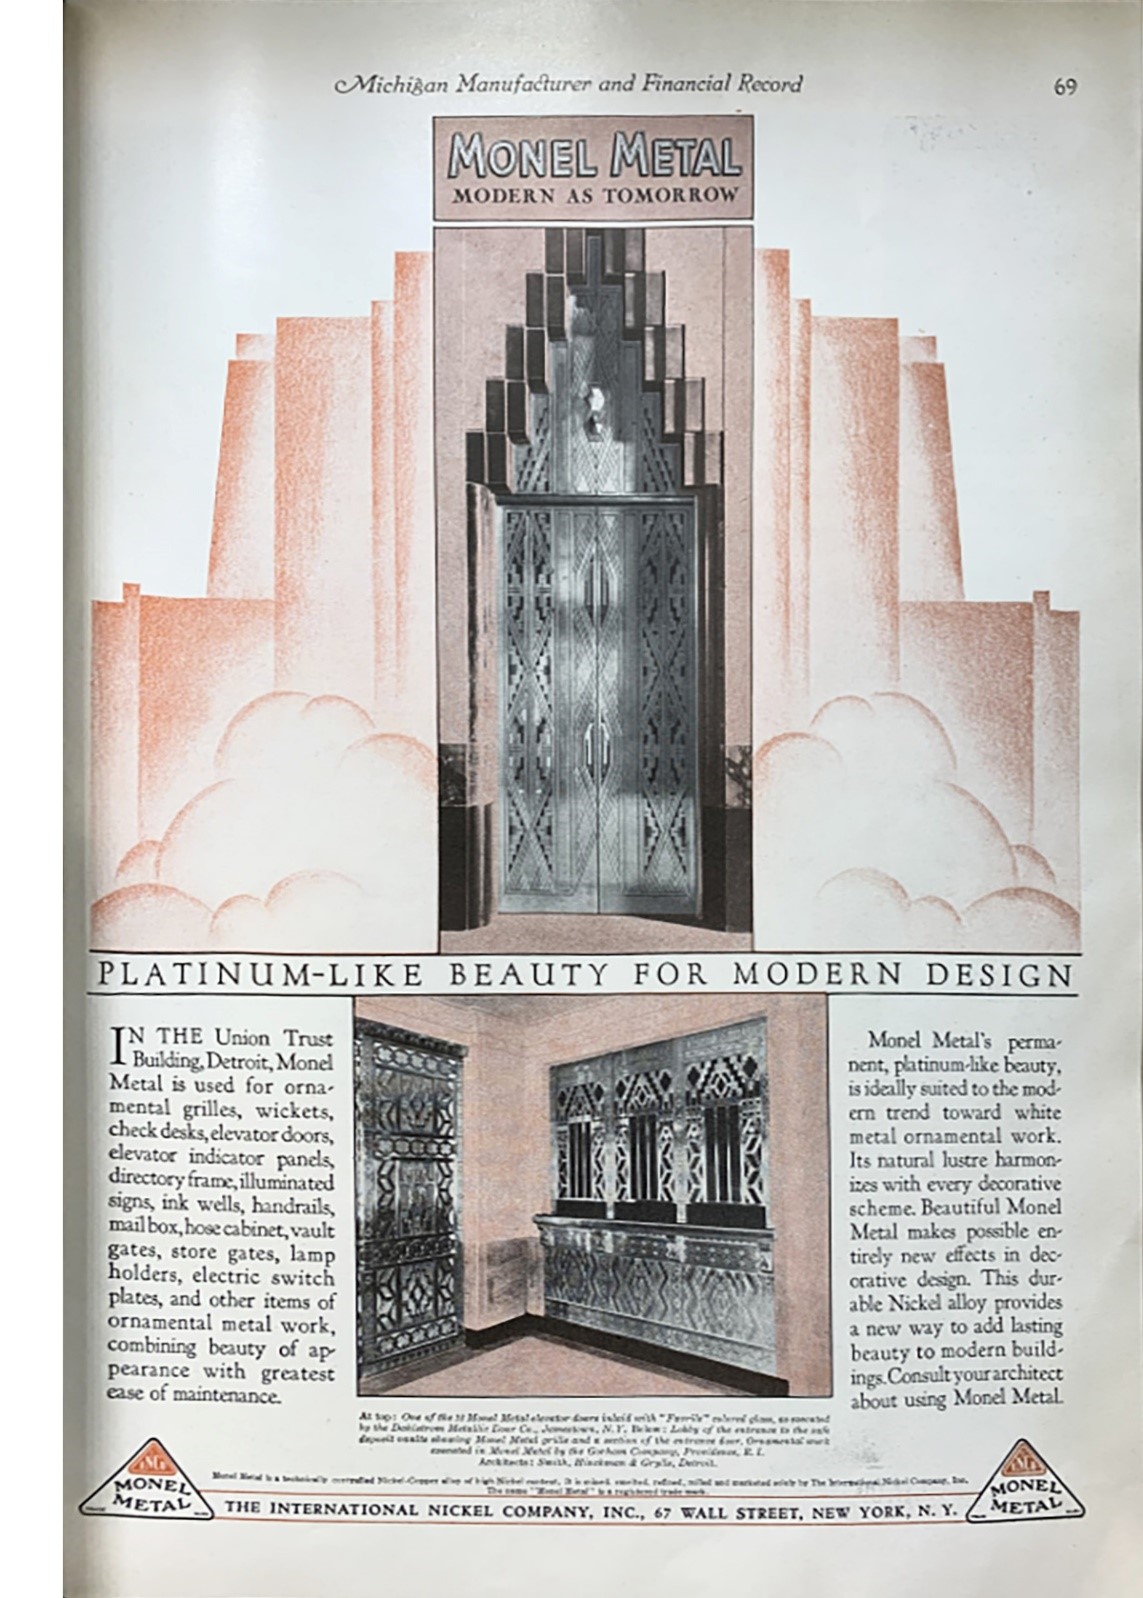 Fig. 2 An advertisement from the late 1920s for Monel doors and grilles in in Michigan Manufacturer and Financial Record, INCO, supplement March, 1929.